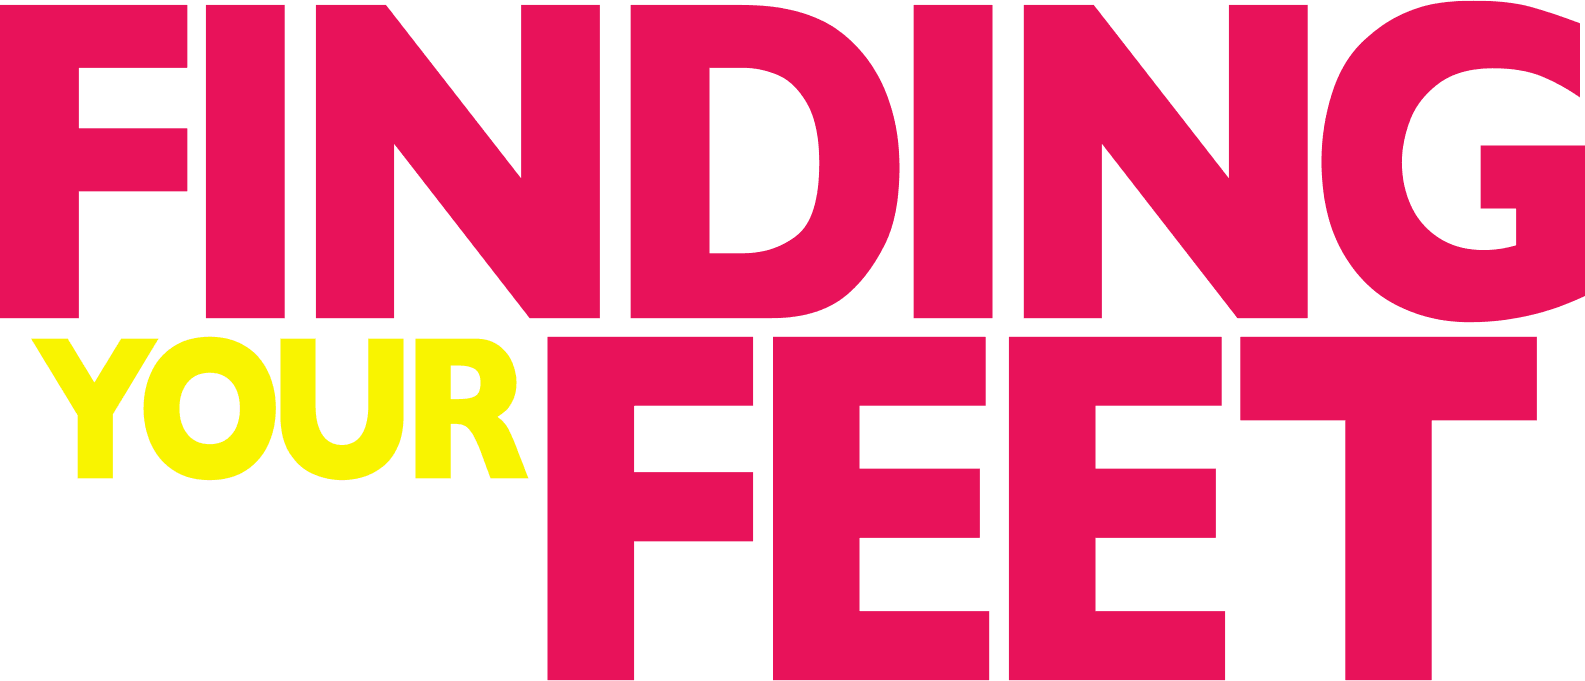 Finding Your Feet logo